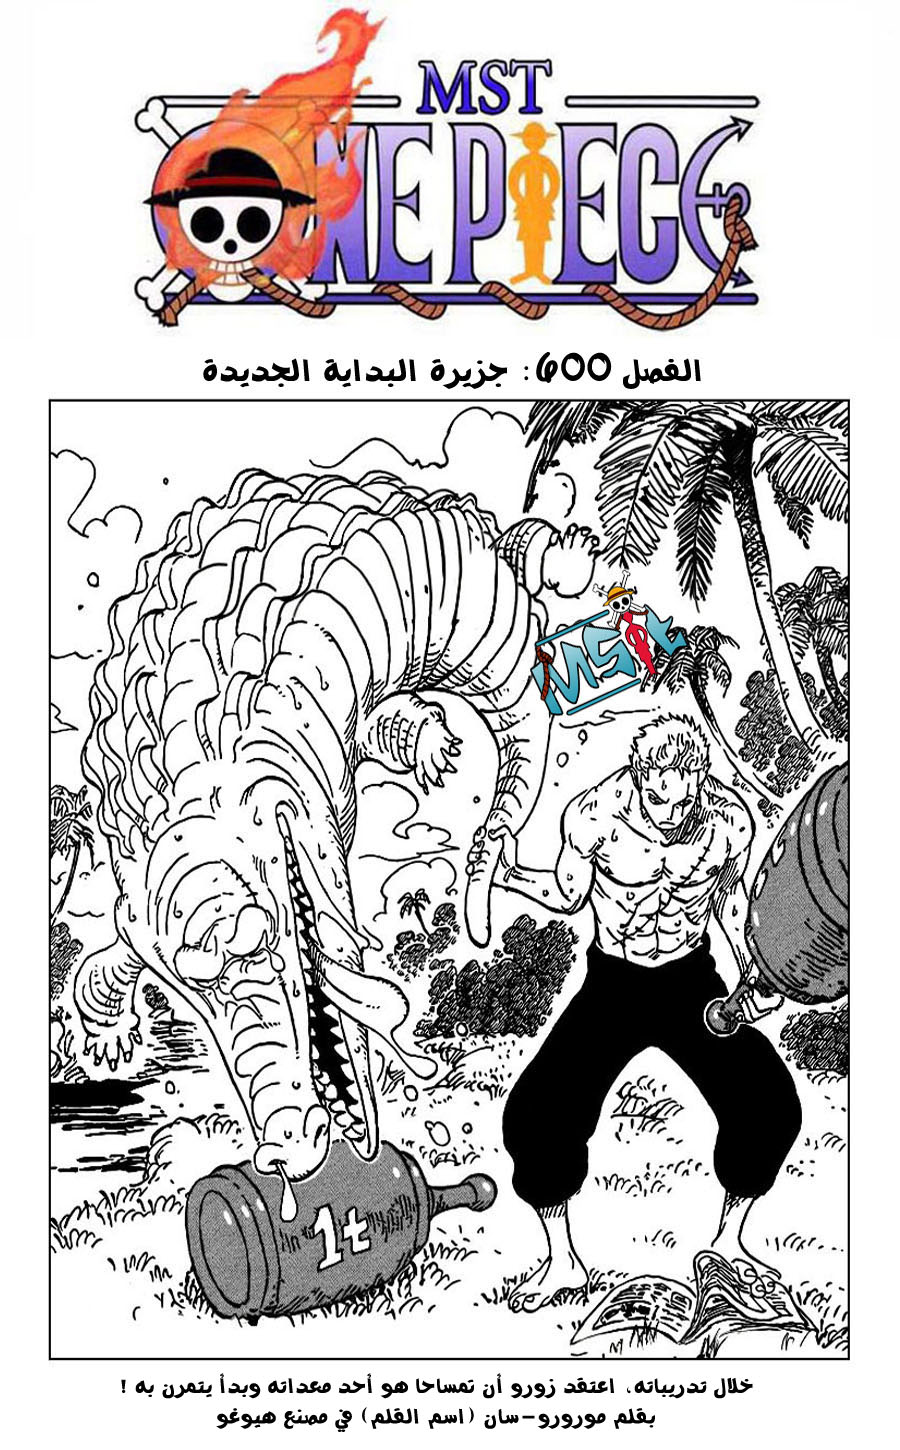 One Piece: Chapter 600 - Page 1